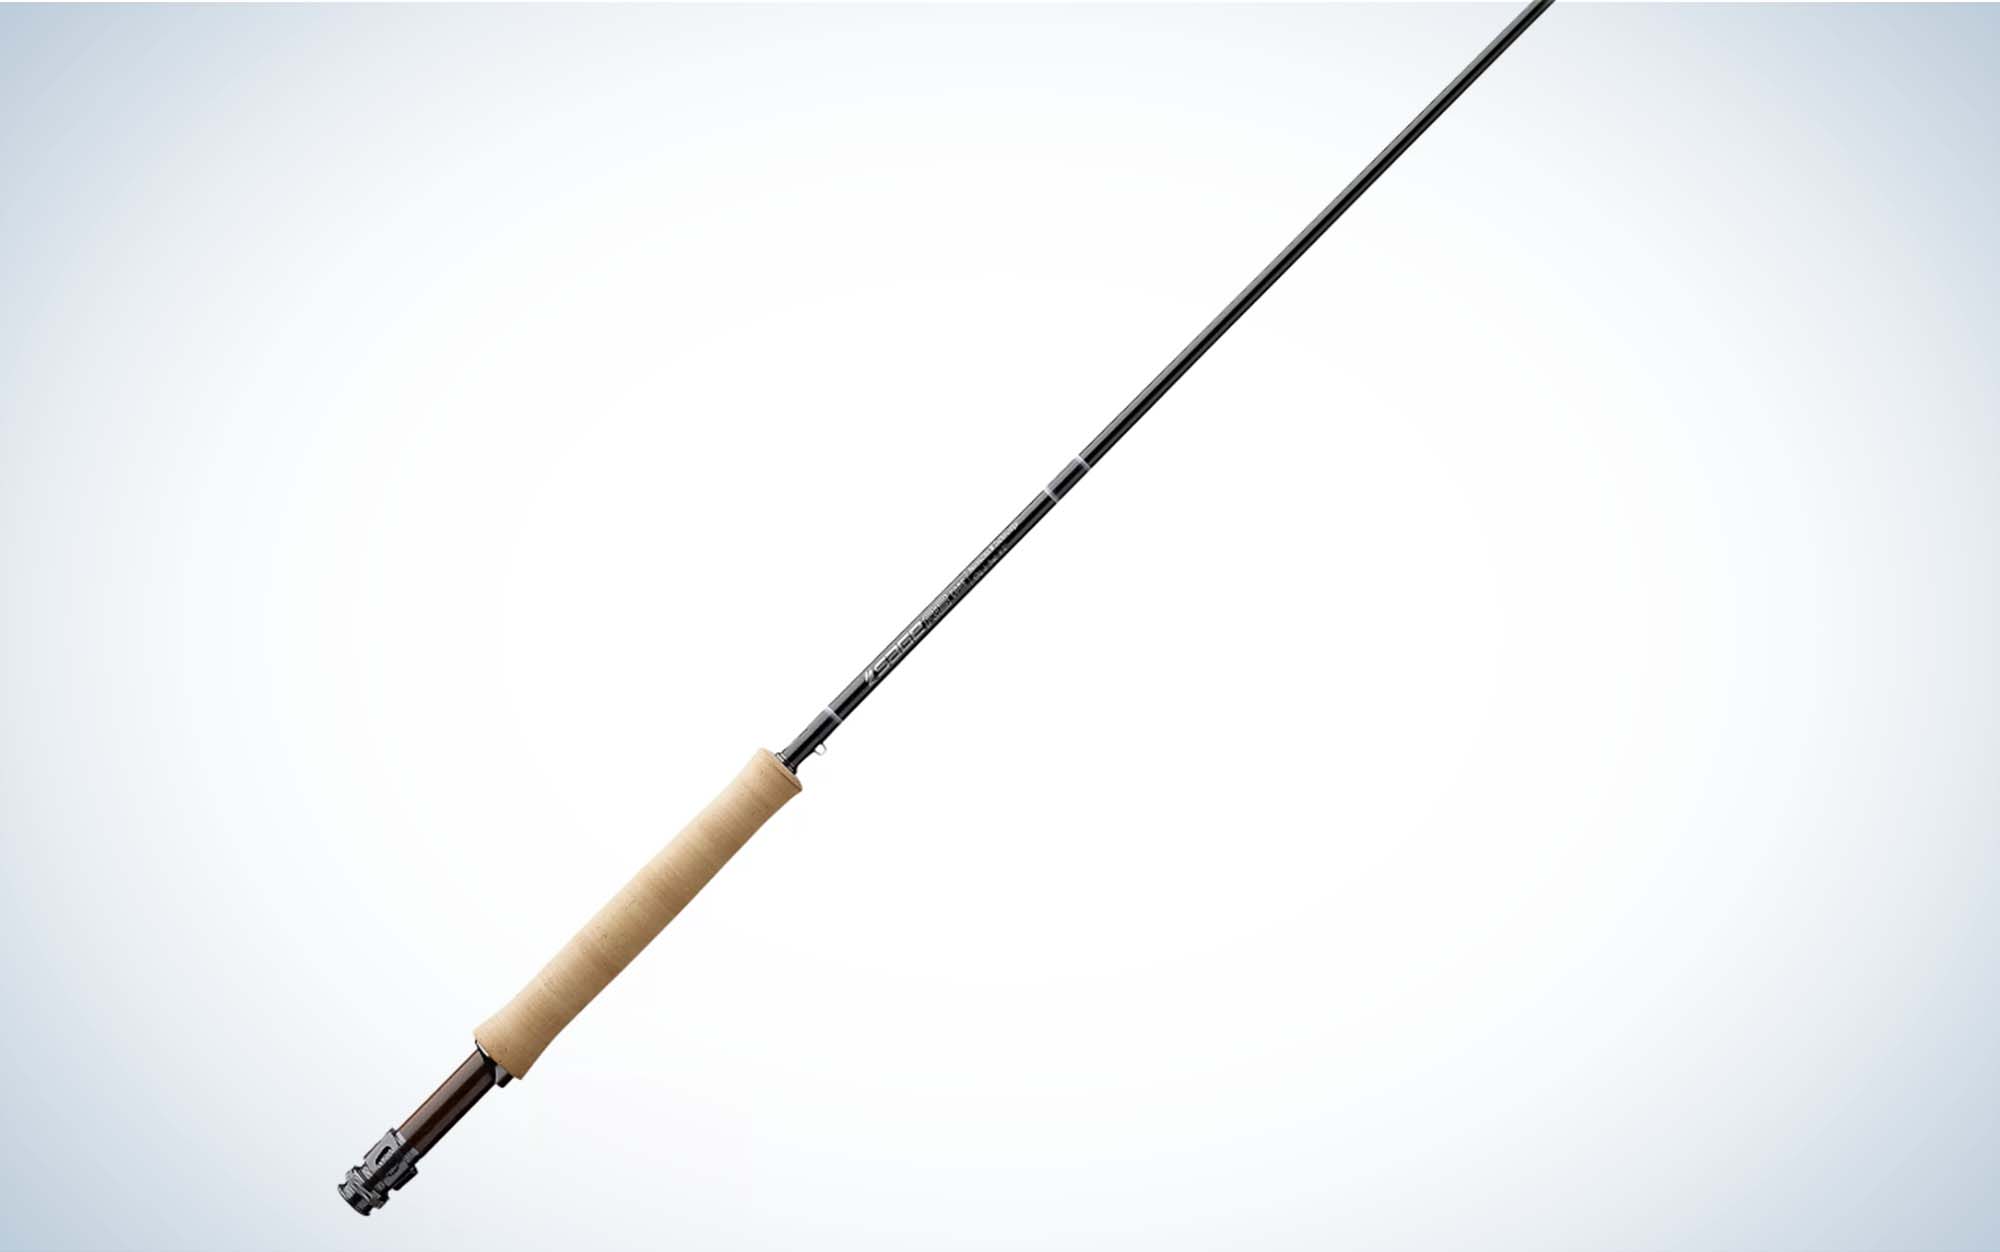 The Sage R8 Core is the best trout fly rod for casting.